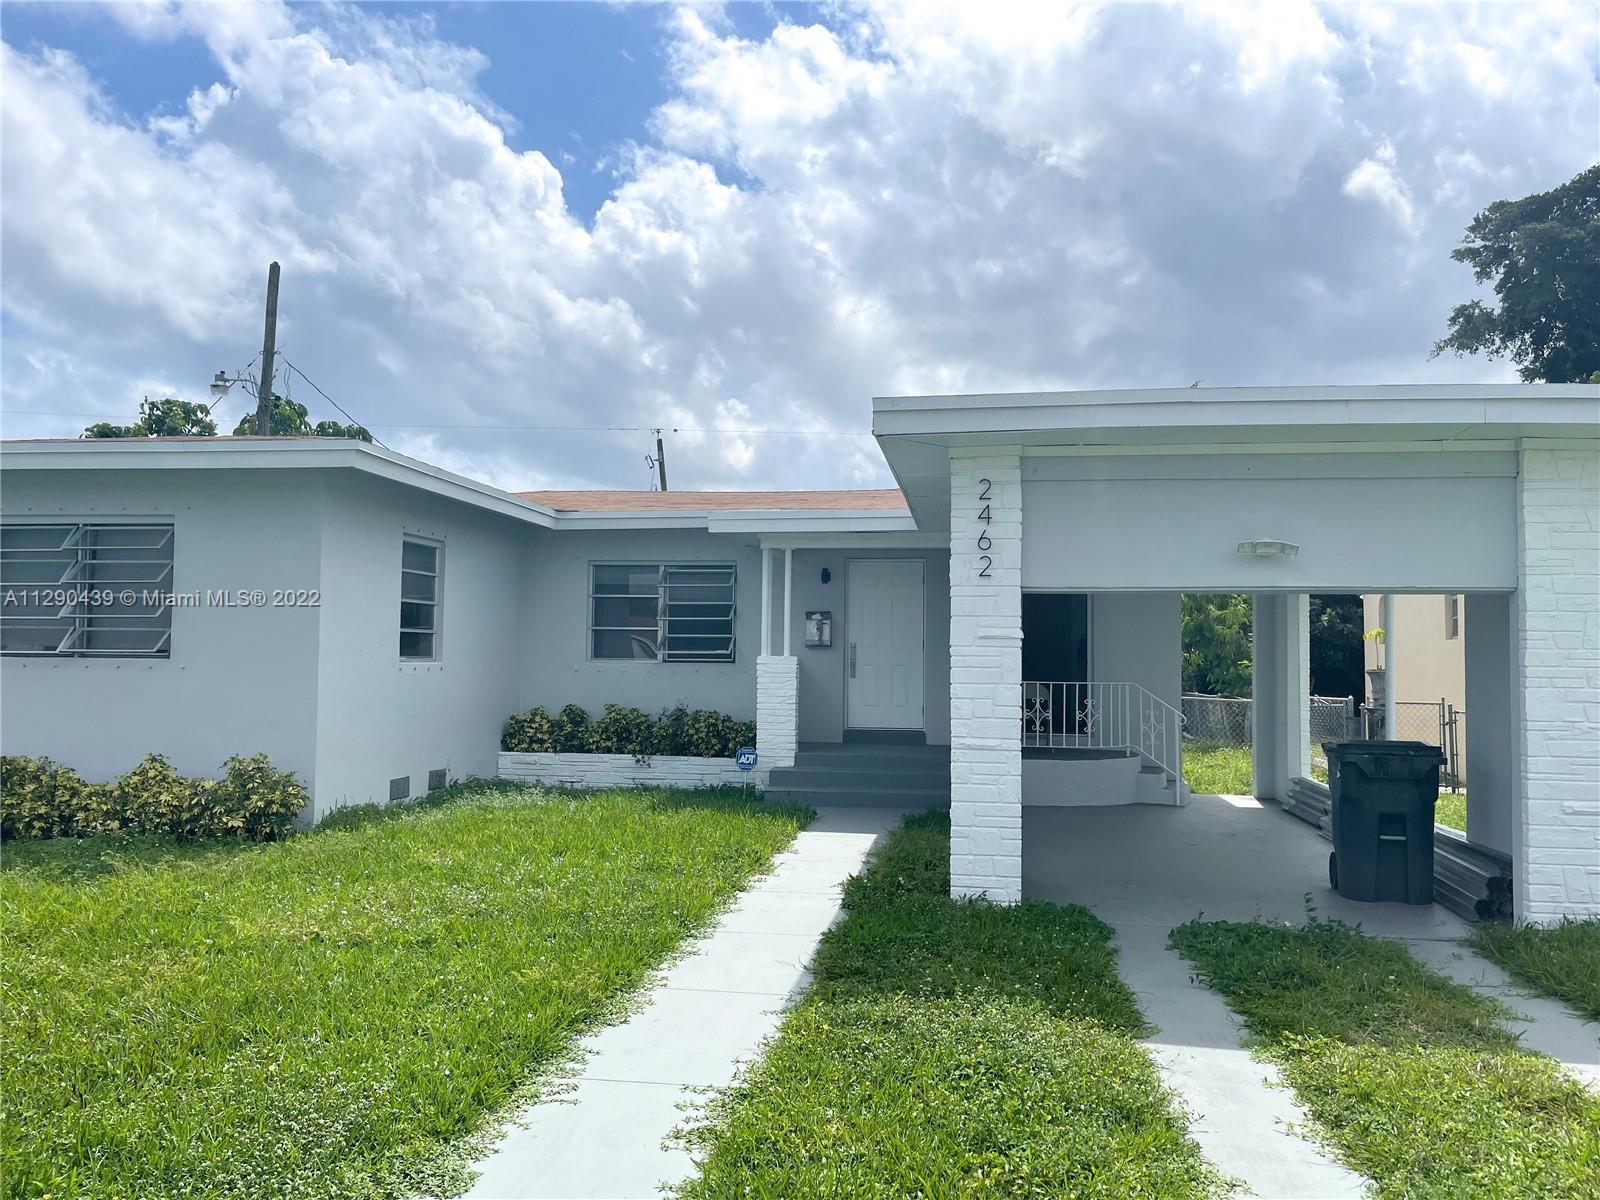 Photo of 2462 Wiley St in Hollywood, FL